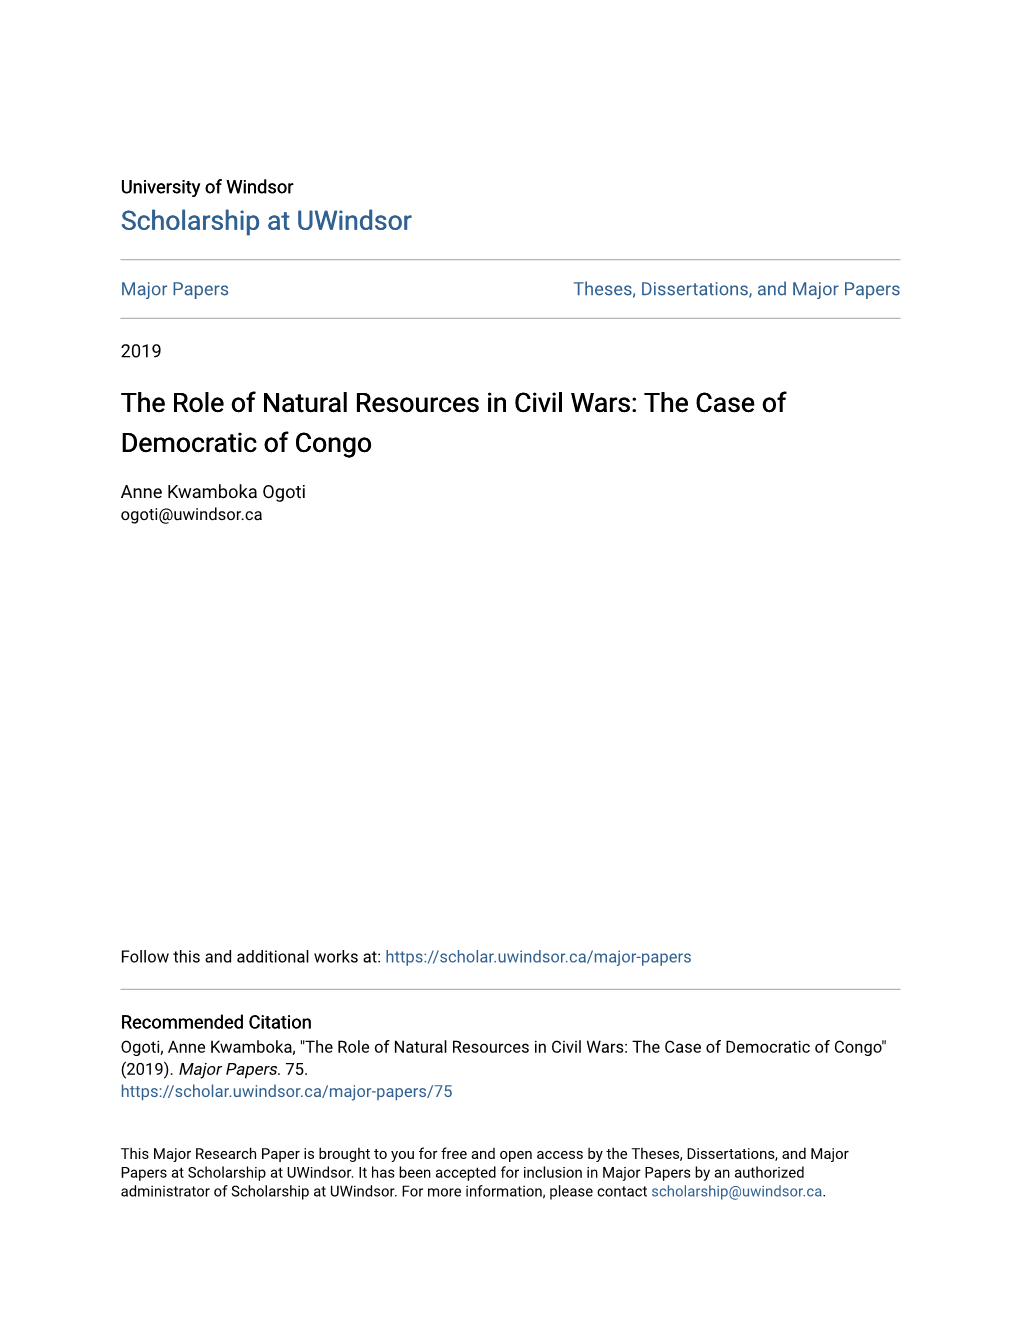 The Role of Natural Resources in Civil Wars: the Case of Democratic of Congo